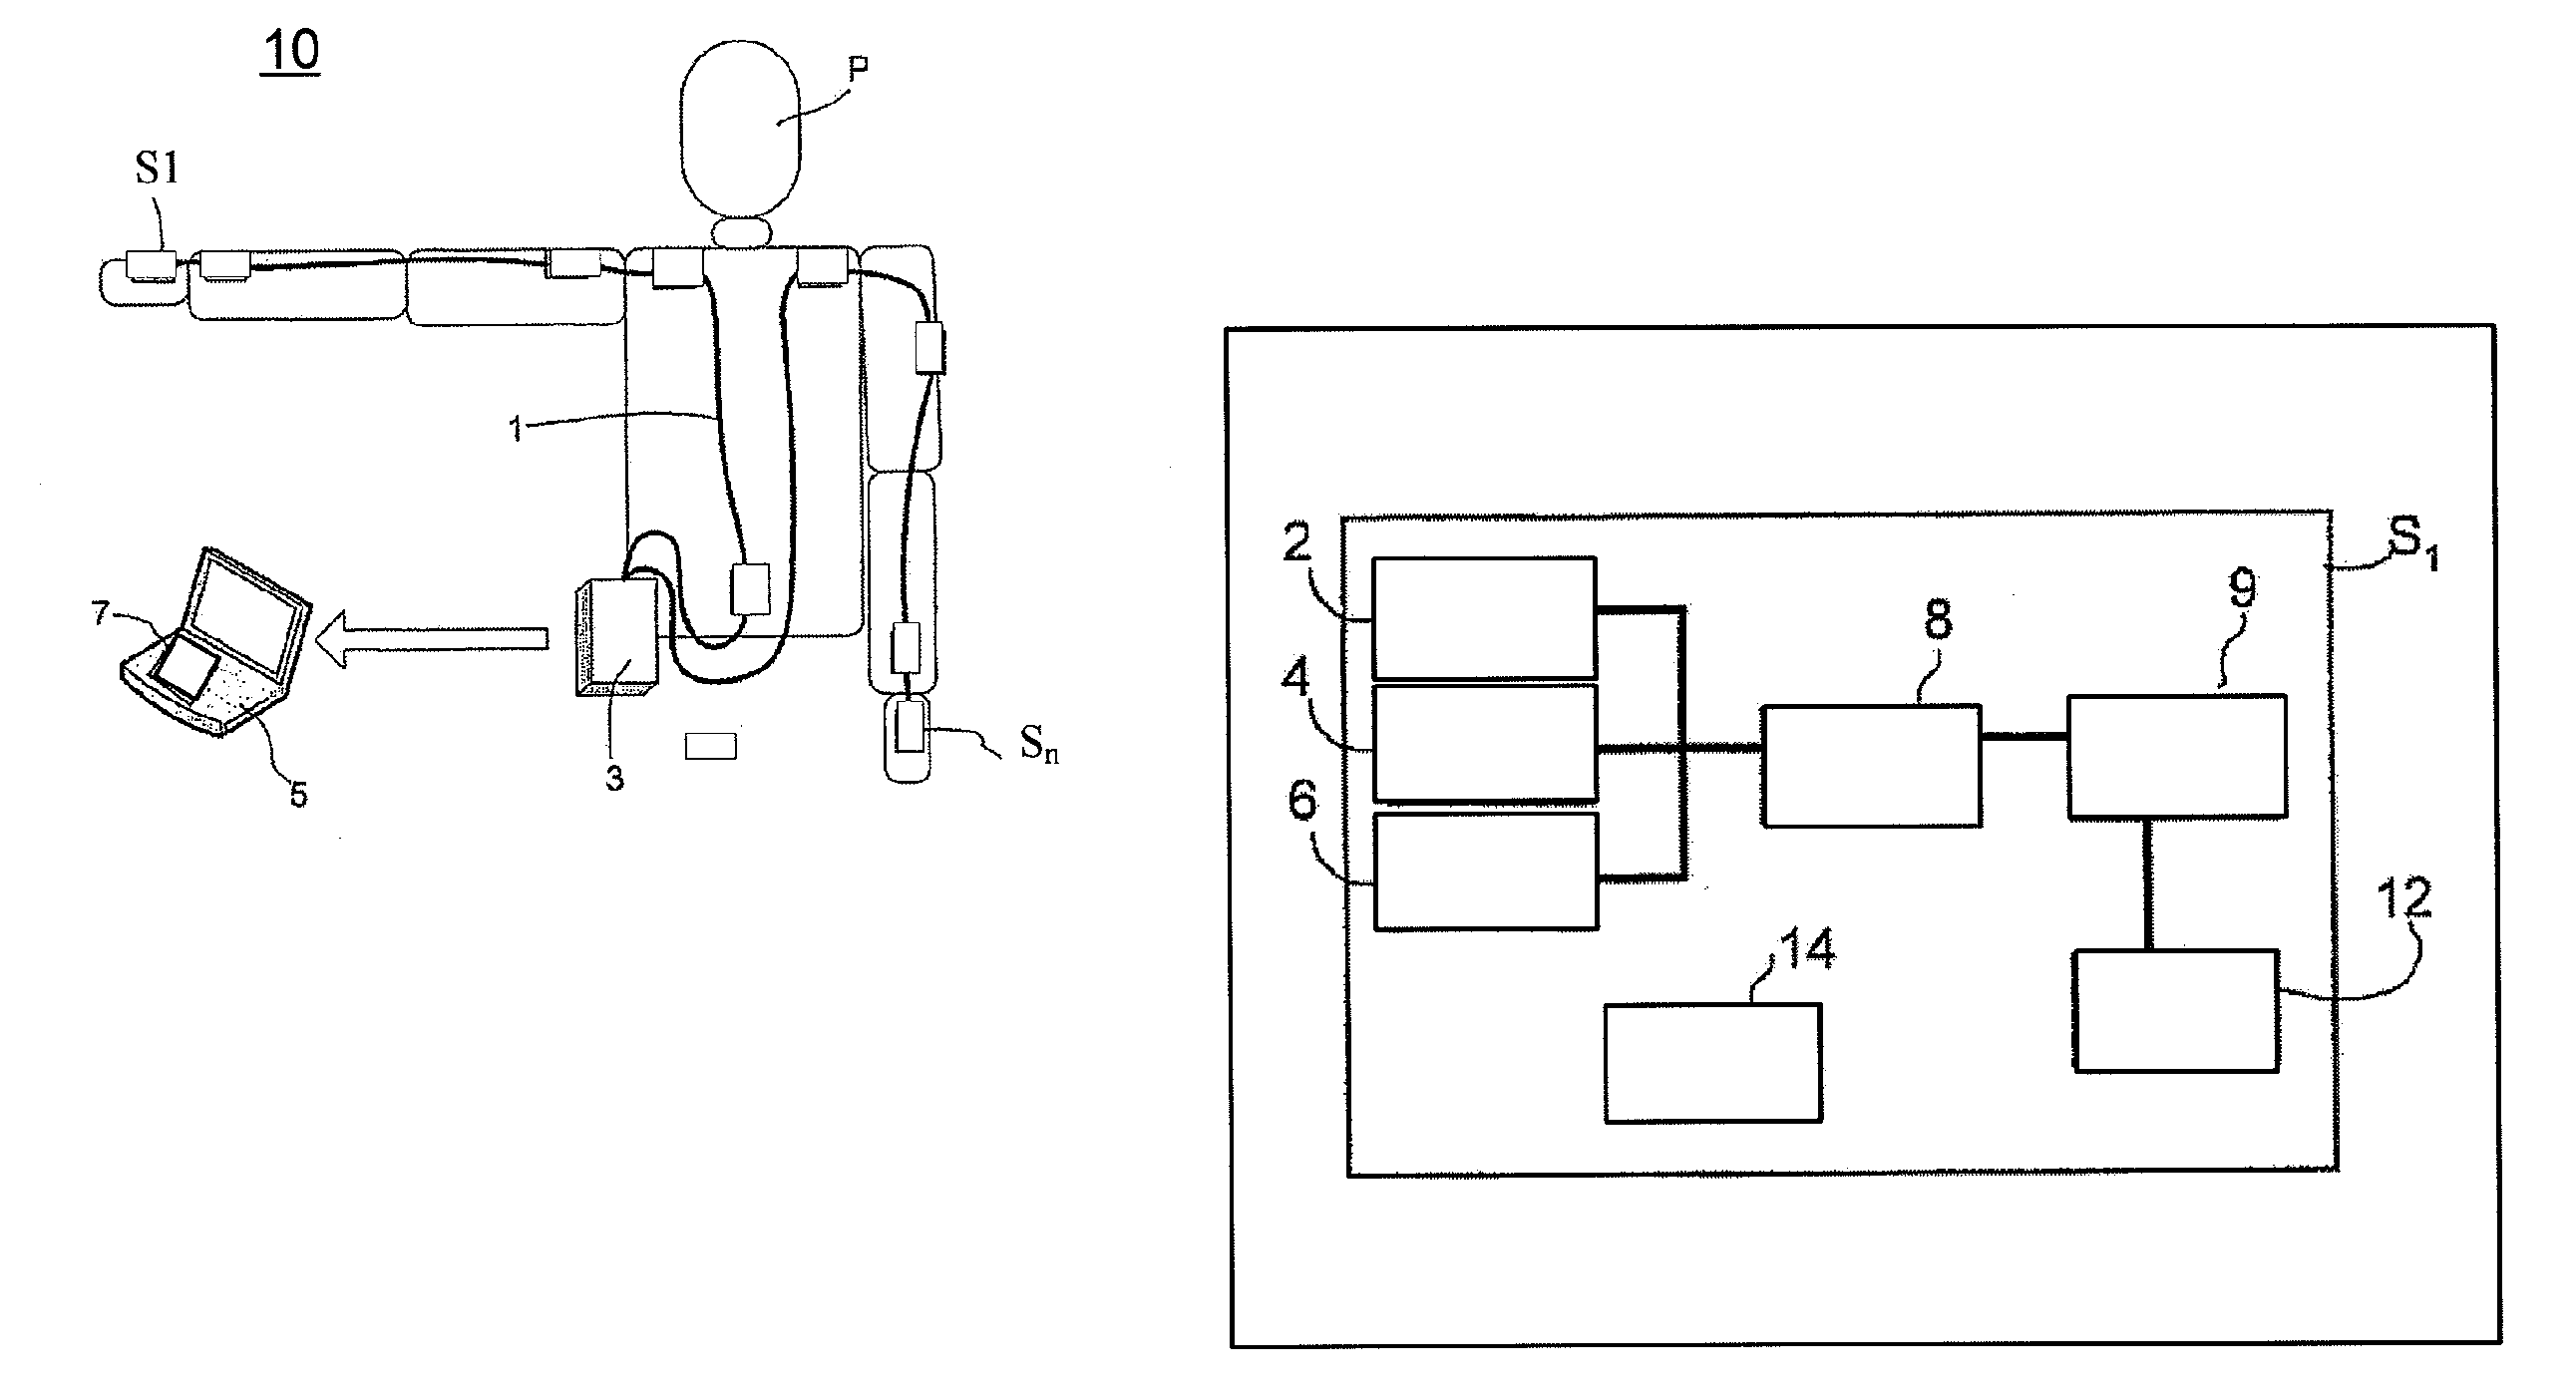 Sytem and a Method for Motion Tracking Using a Calibration Unit